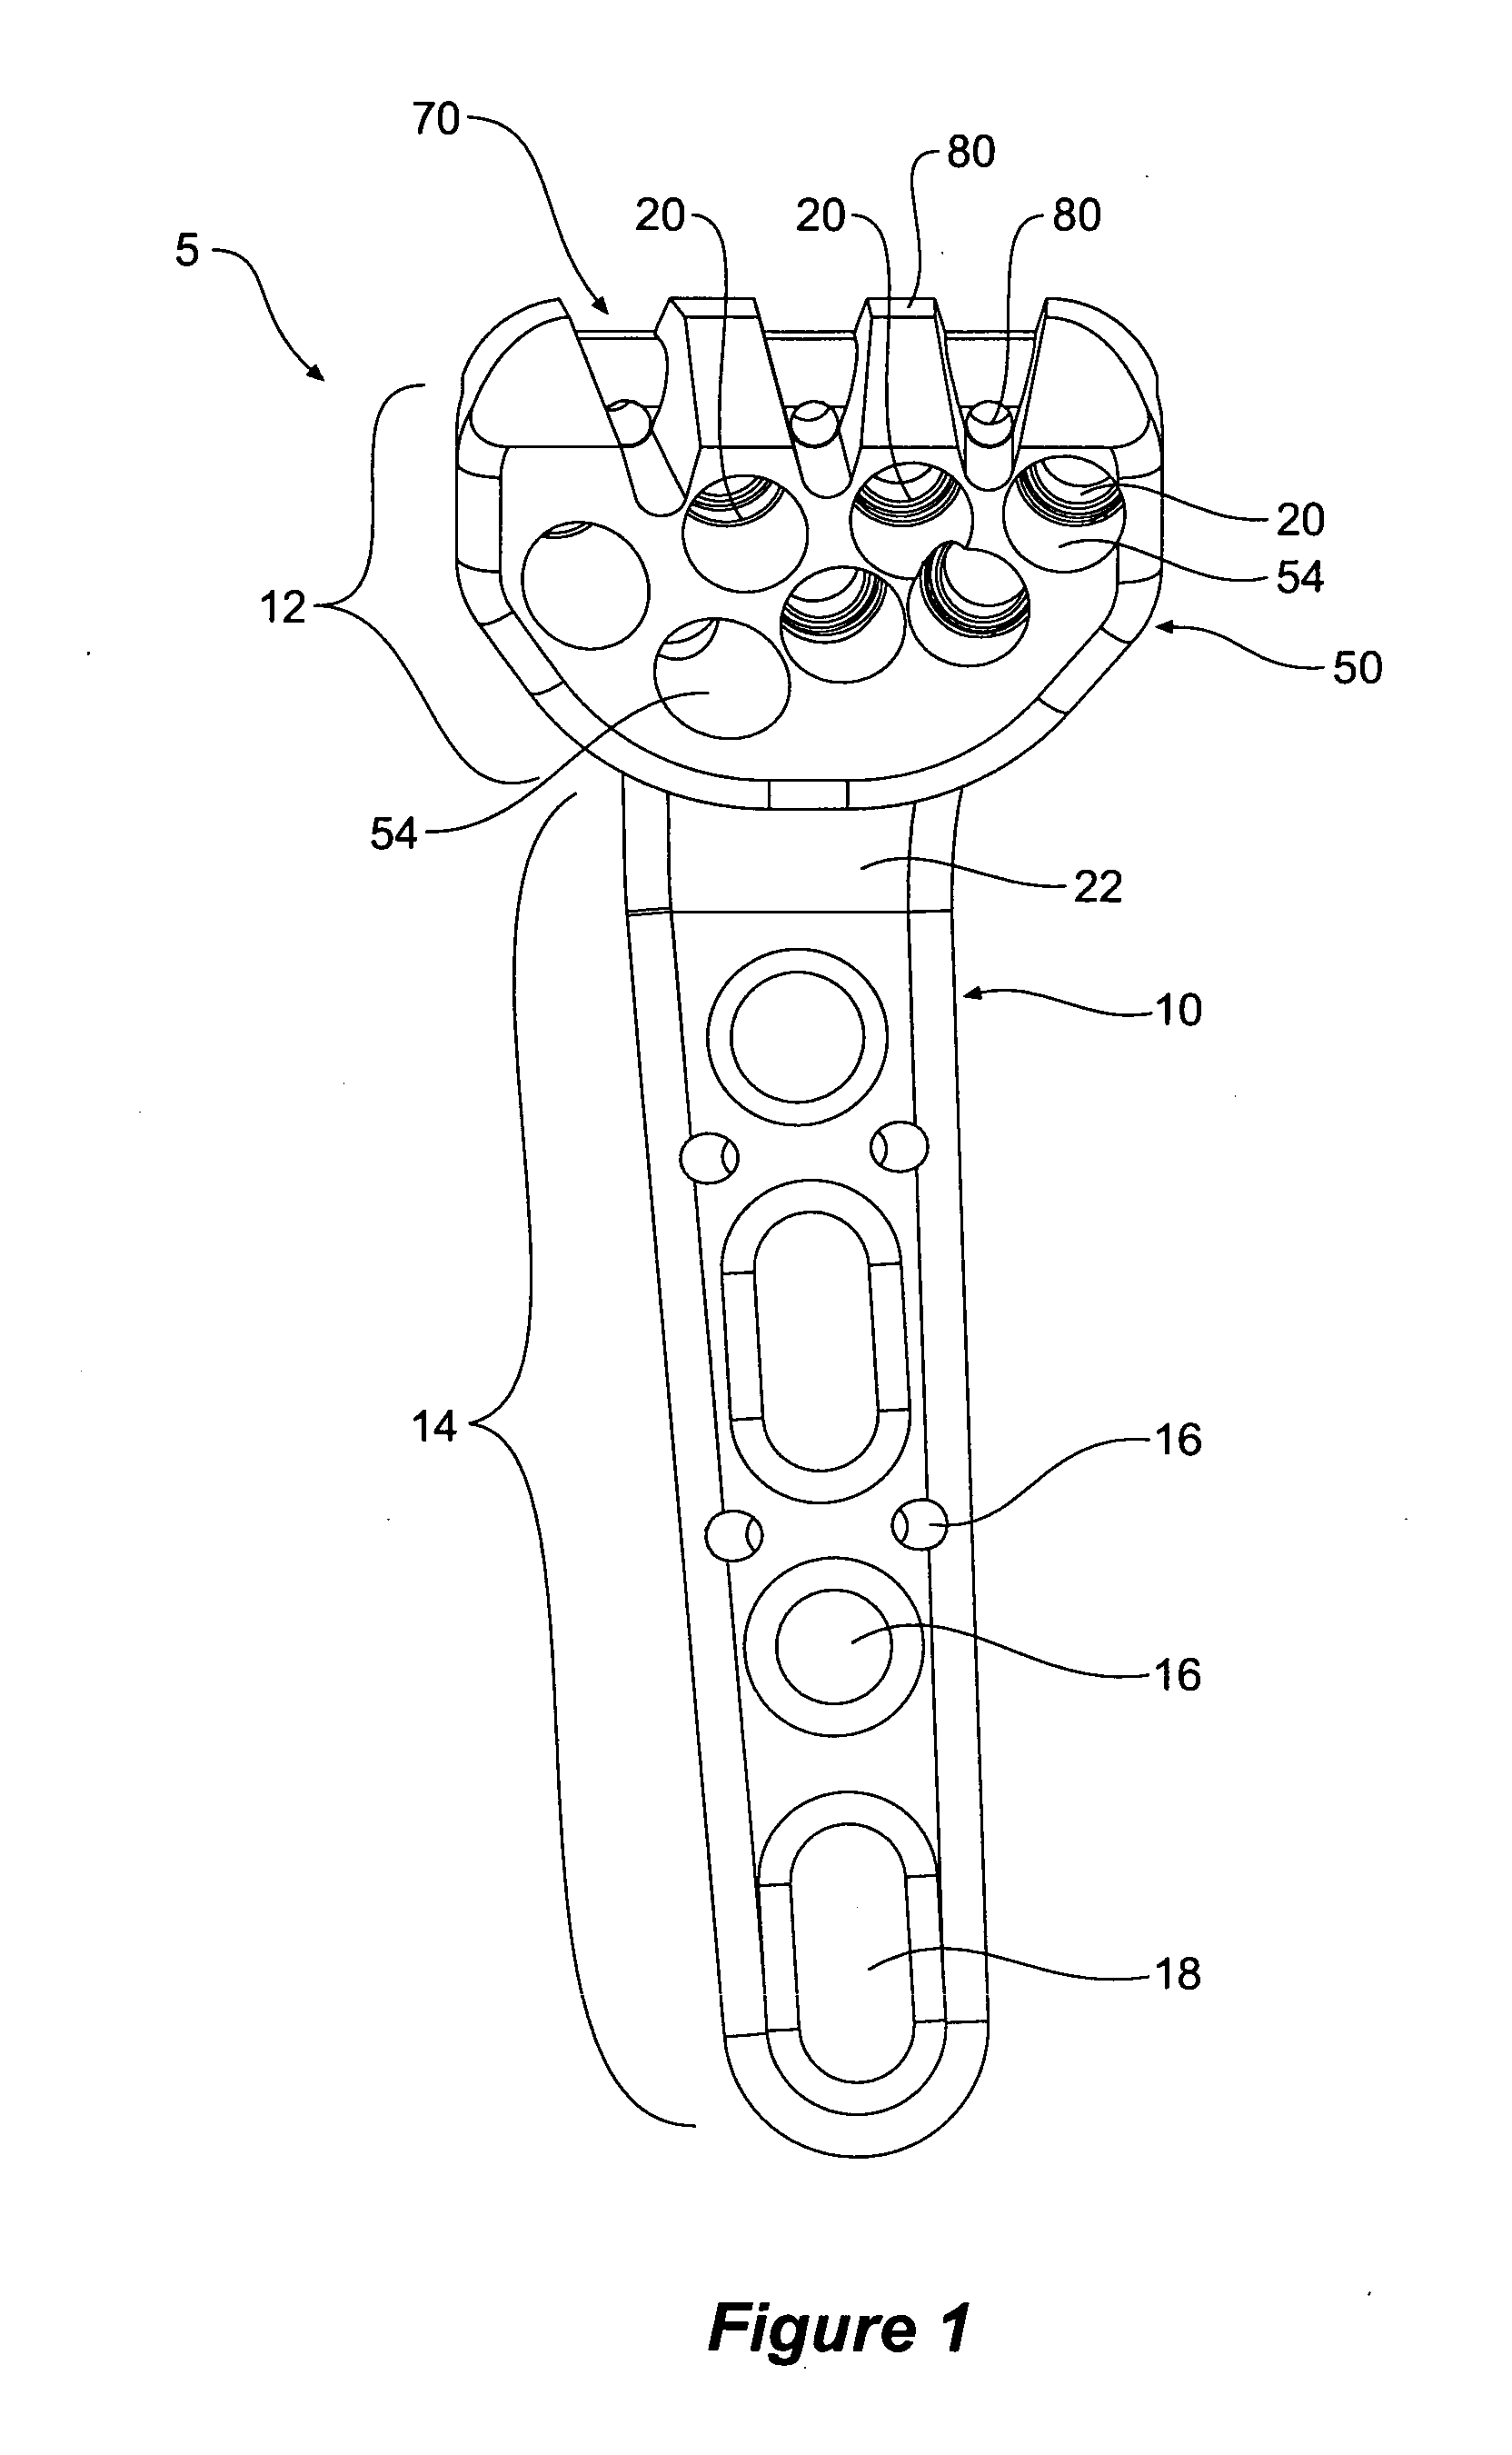 Tool jig for bone implant assembly